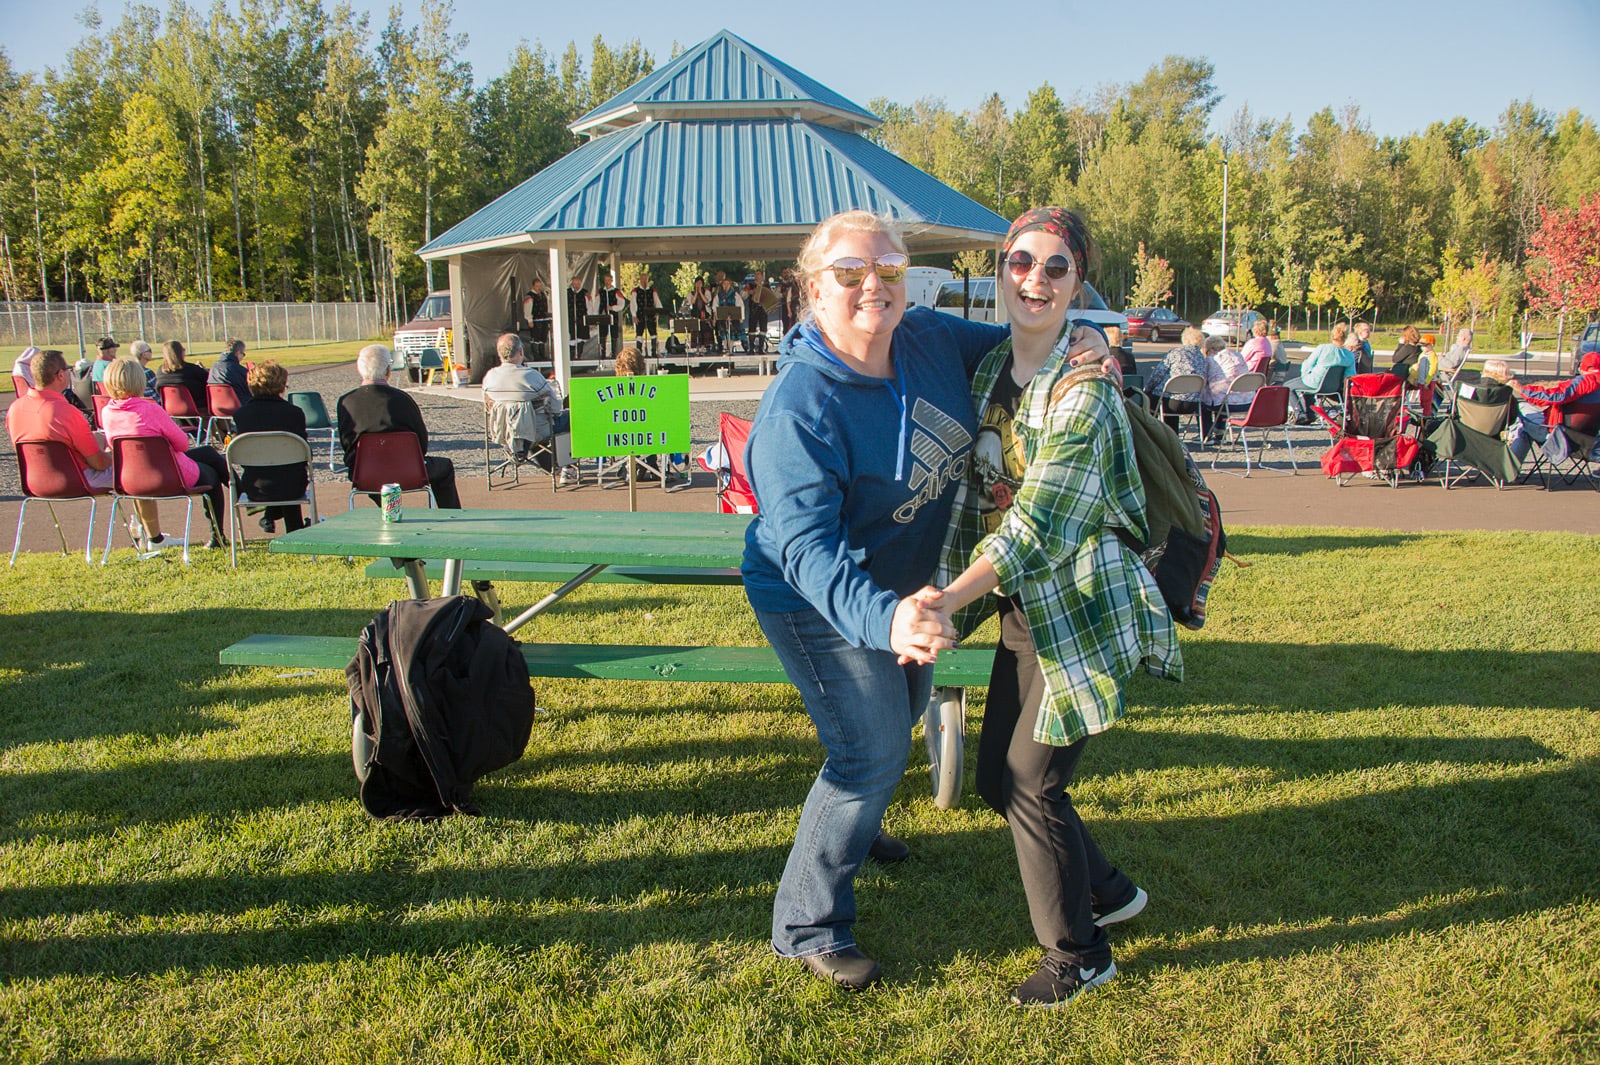 Two women dance at the Pavilion at the GND REC while smiling with a crowd behind them